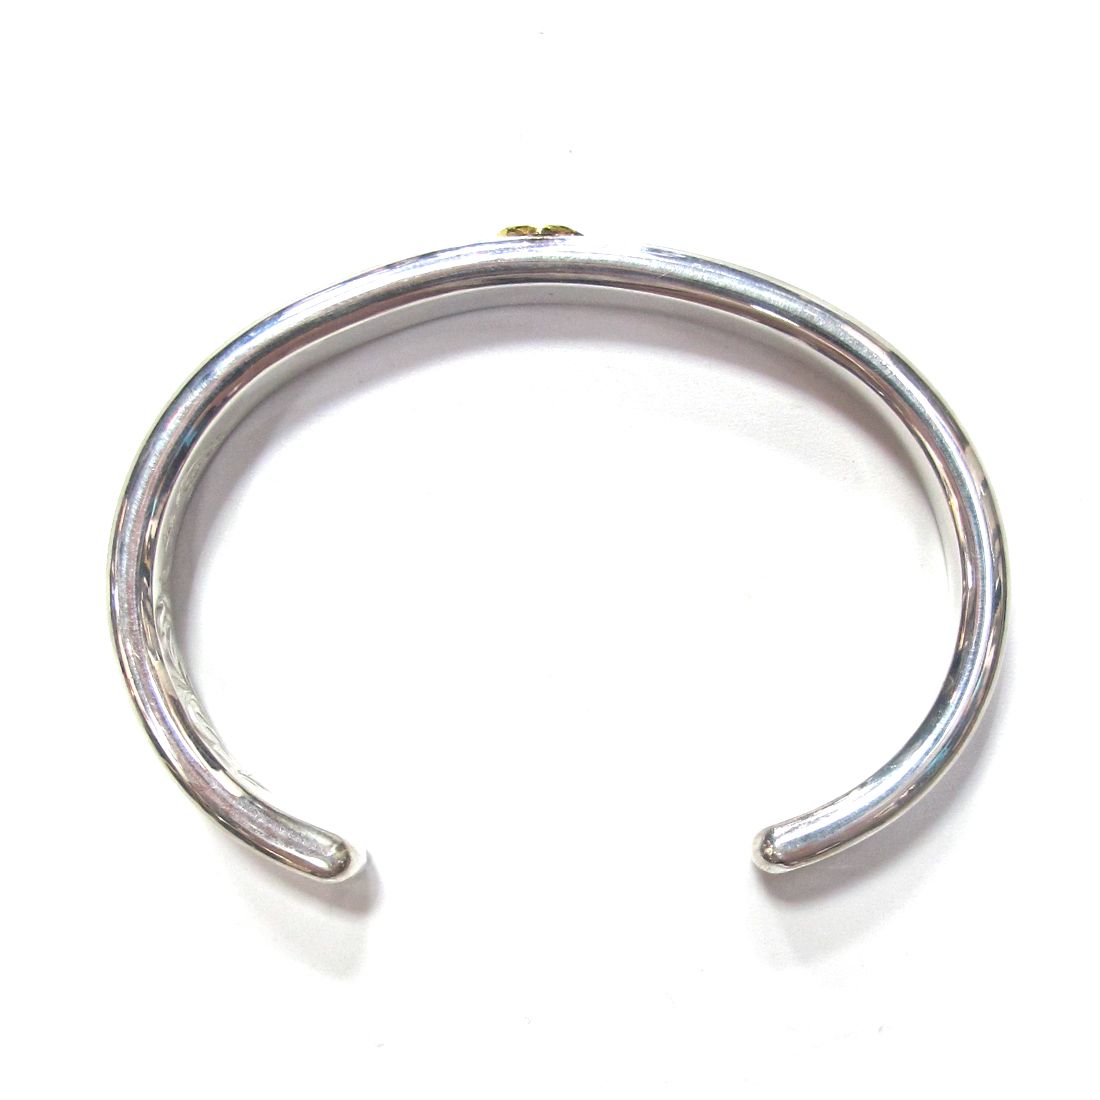 STUDIO T&Y - Plain Bangle 8mm width with Gold Point L (SILVER 